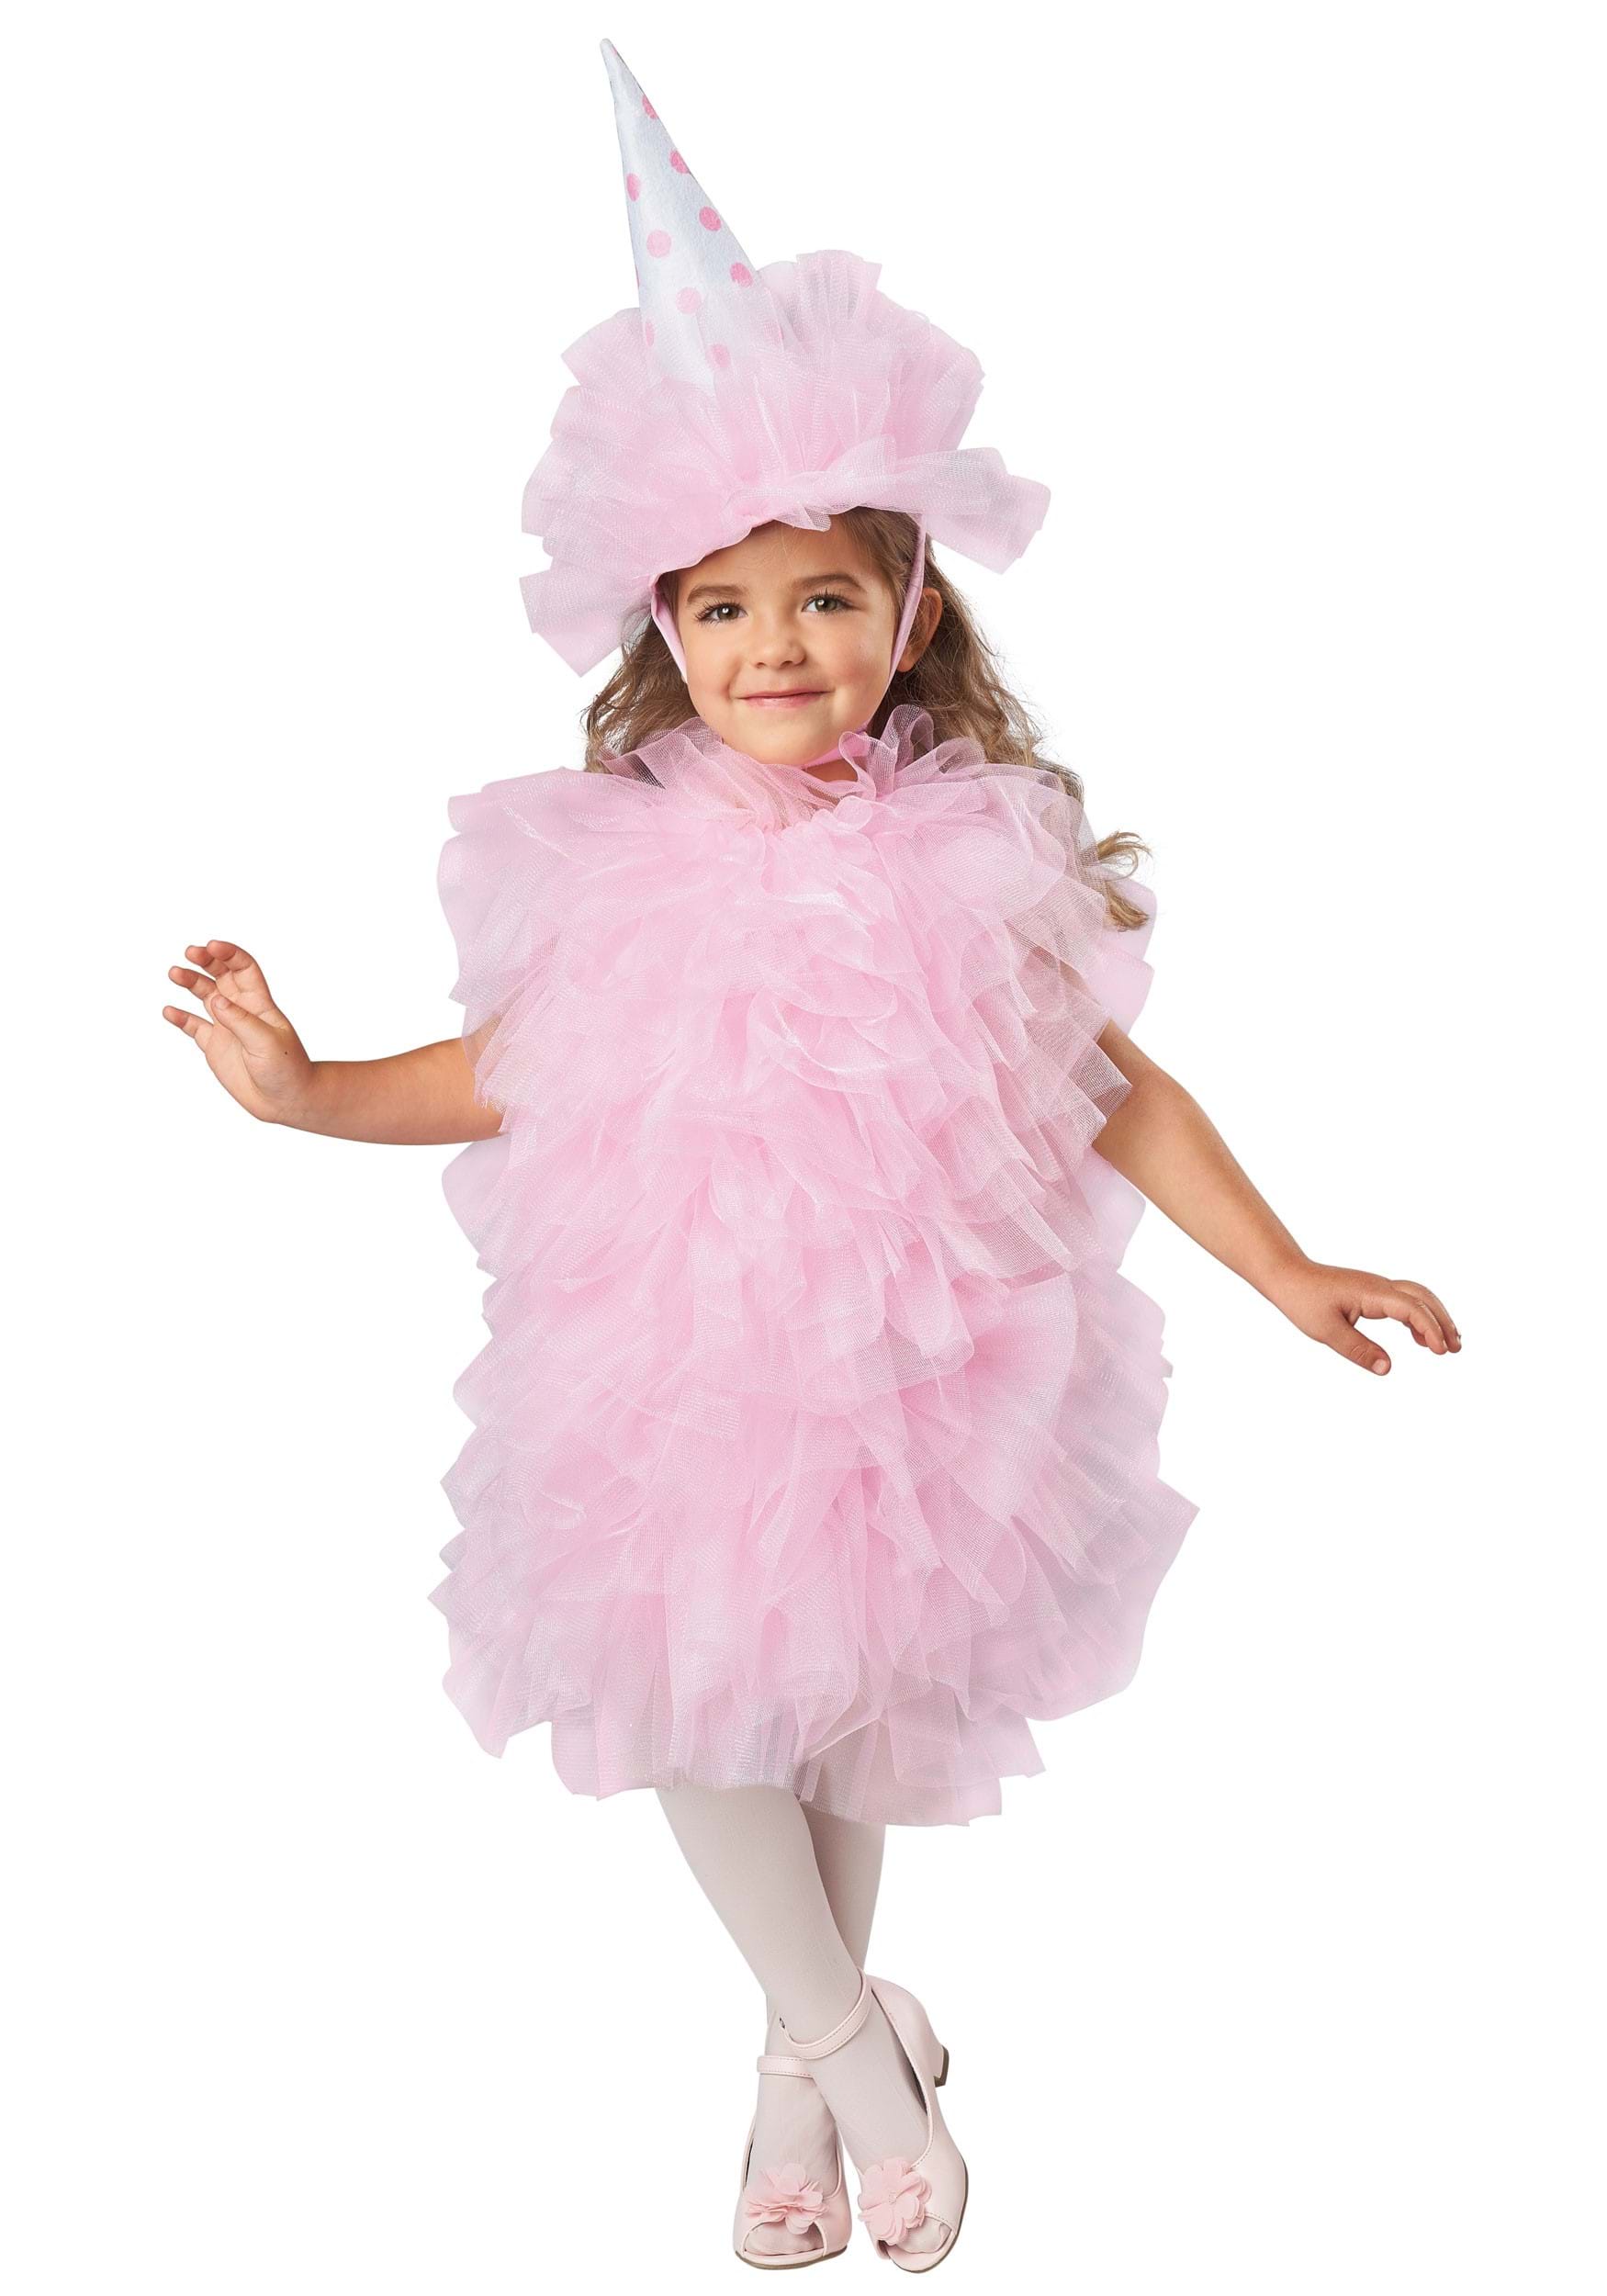 Kid’s Cotton Candy Costume